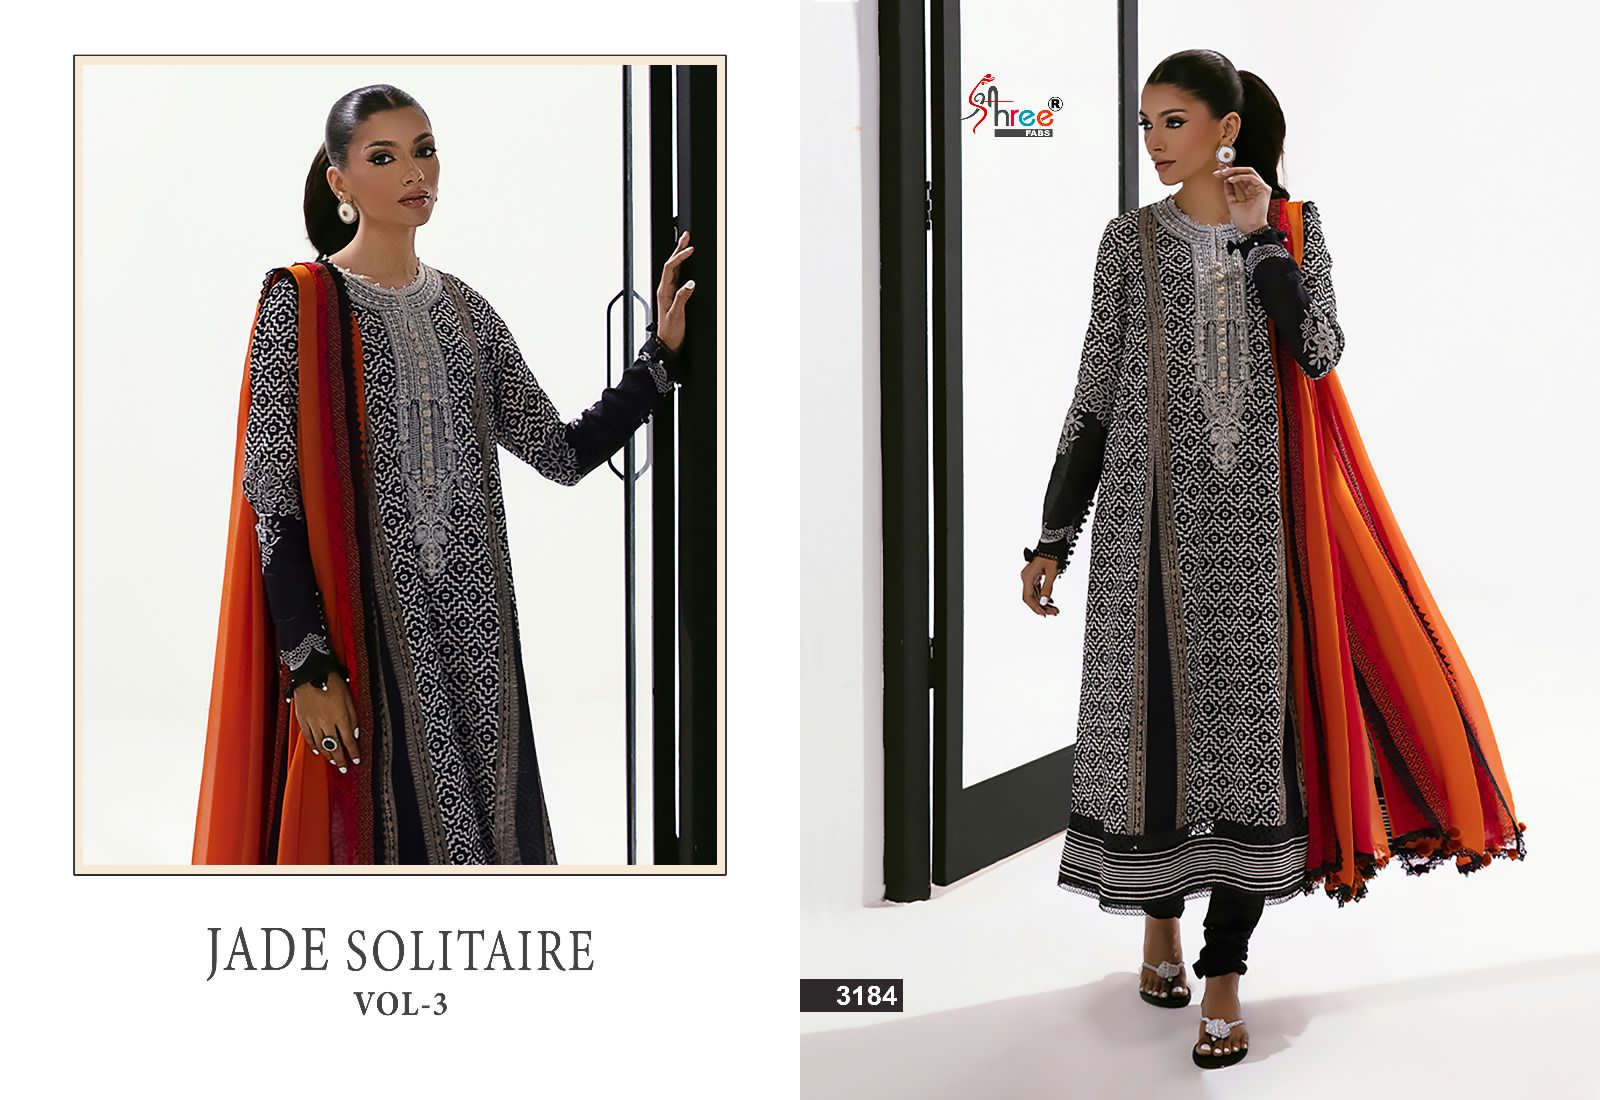 Shree Jade Solitaire Vol 3 collection 5